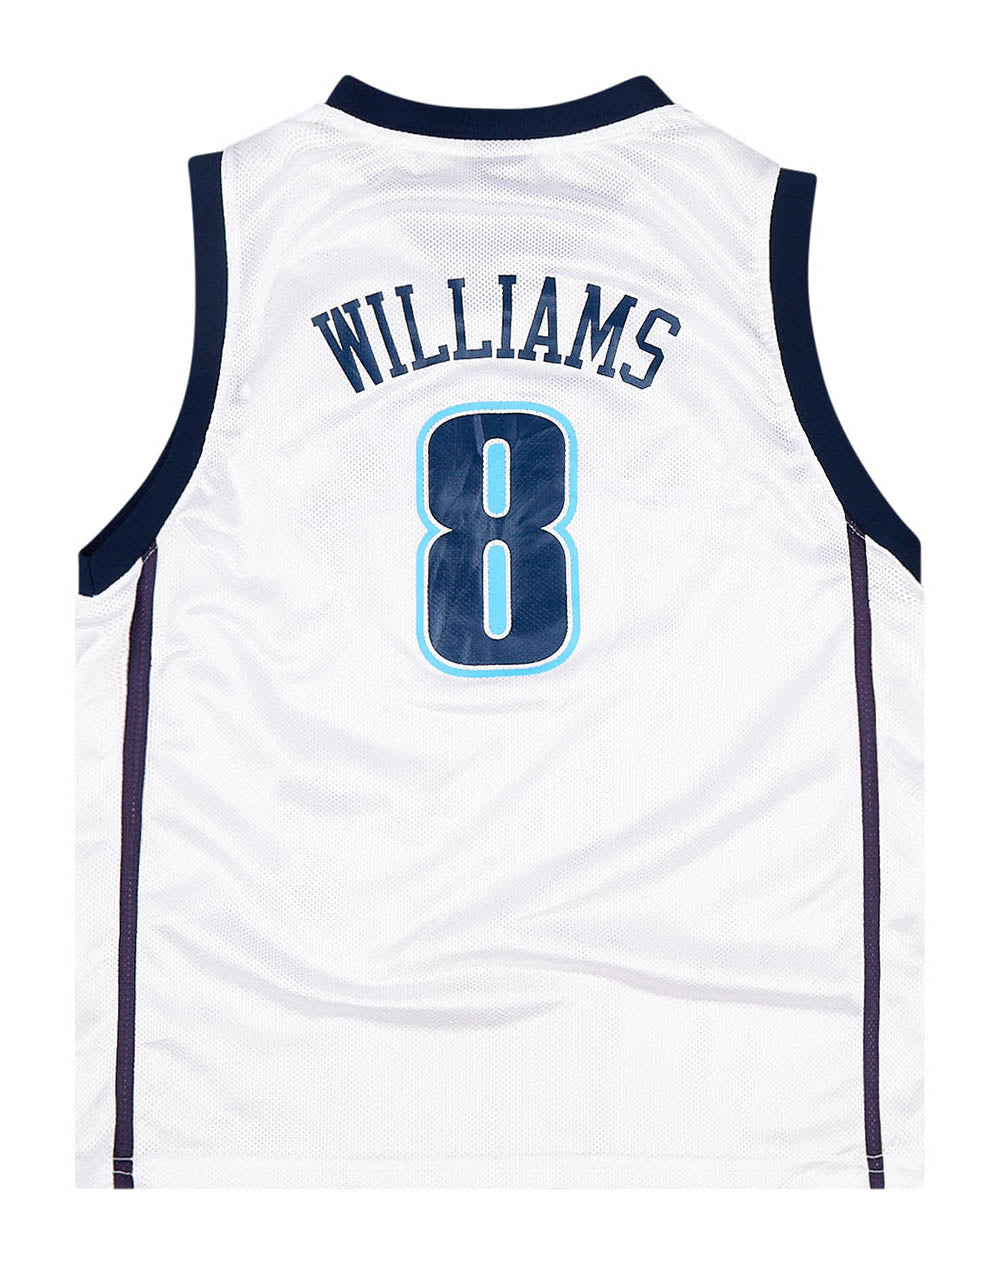 Adidas Brooklyn Nets Williams #8 Basketball Jersey for Sale in